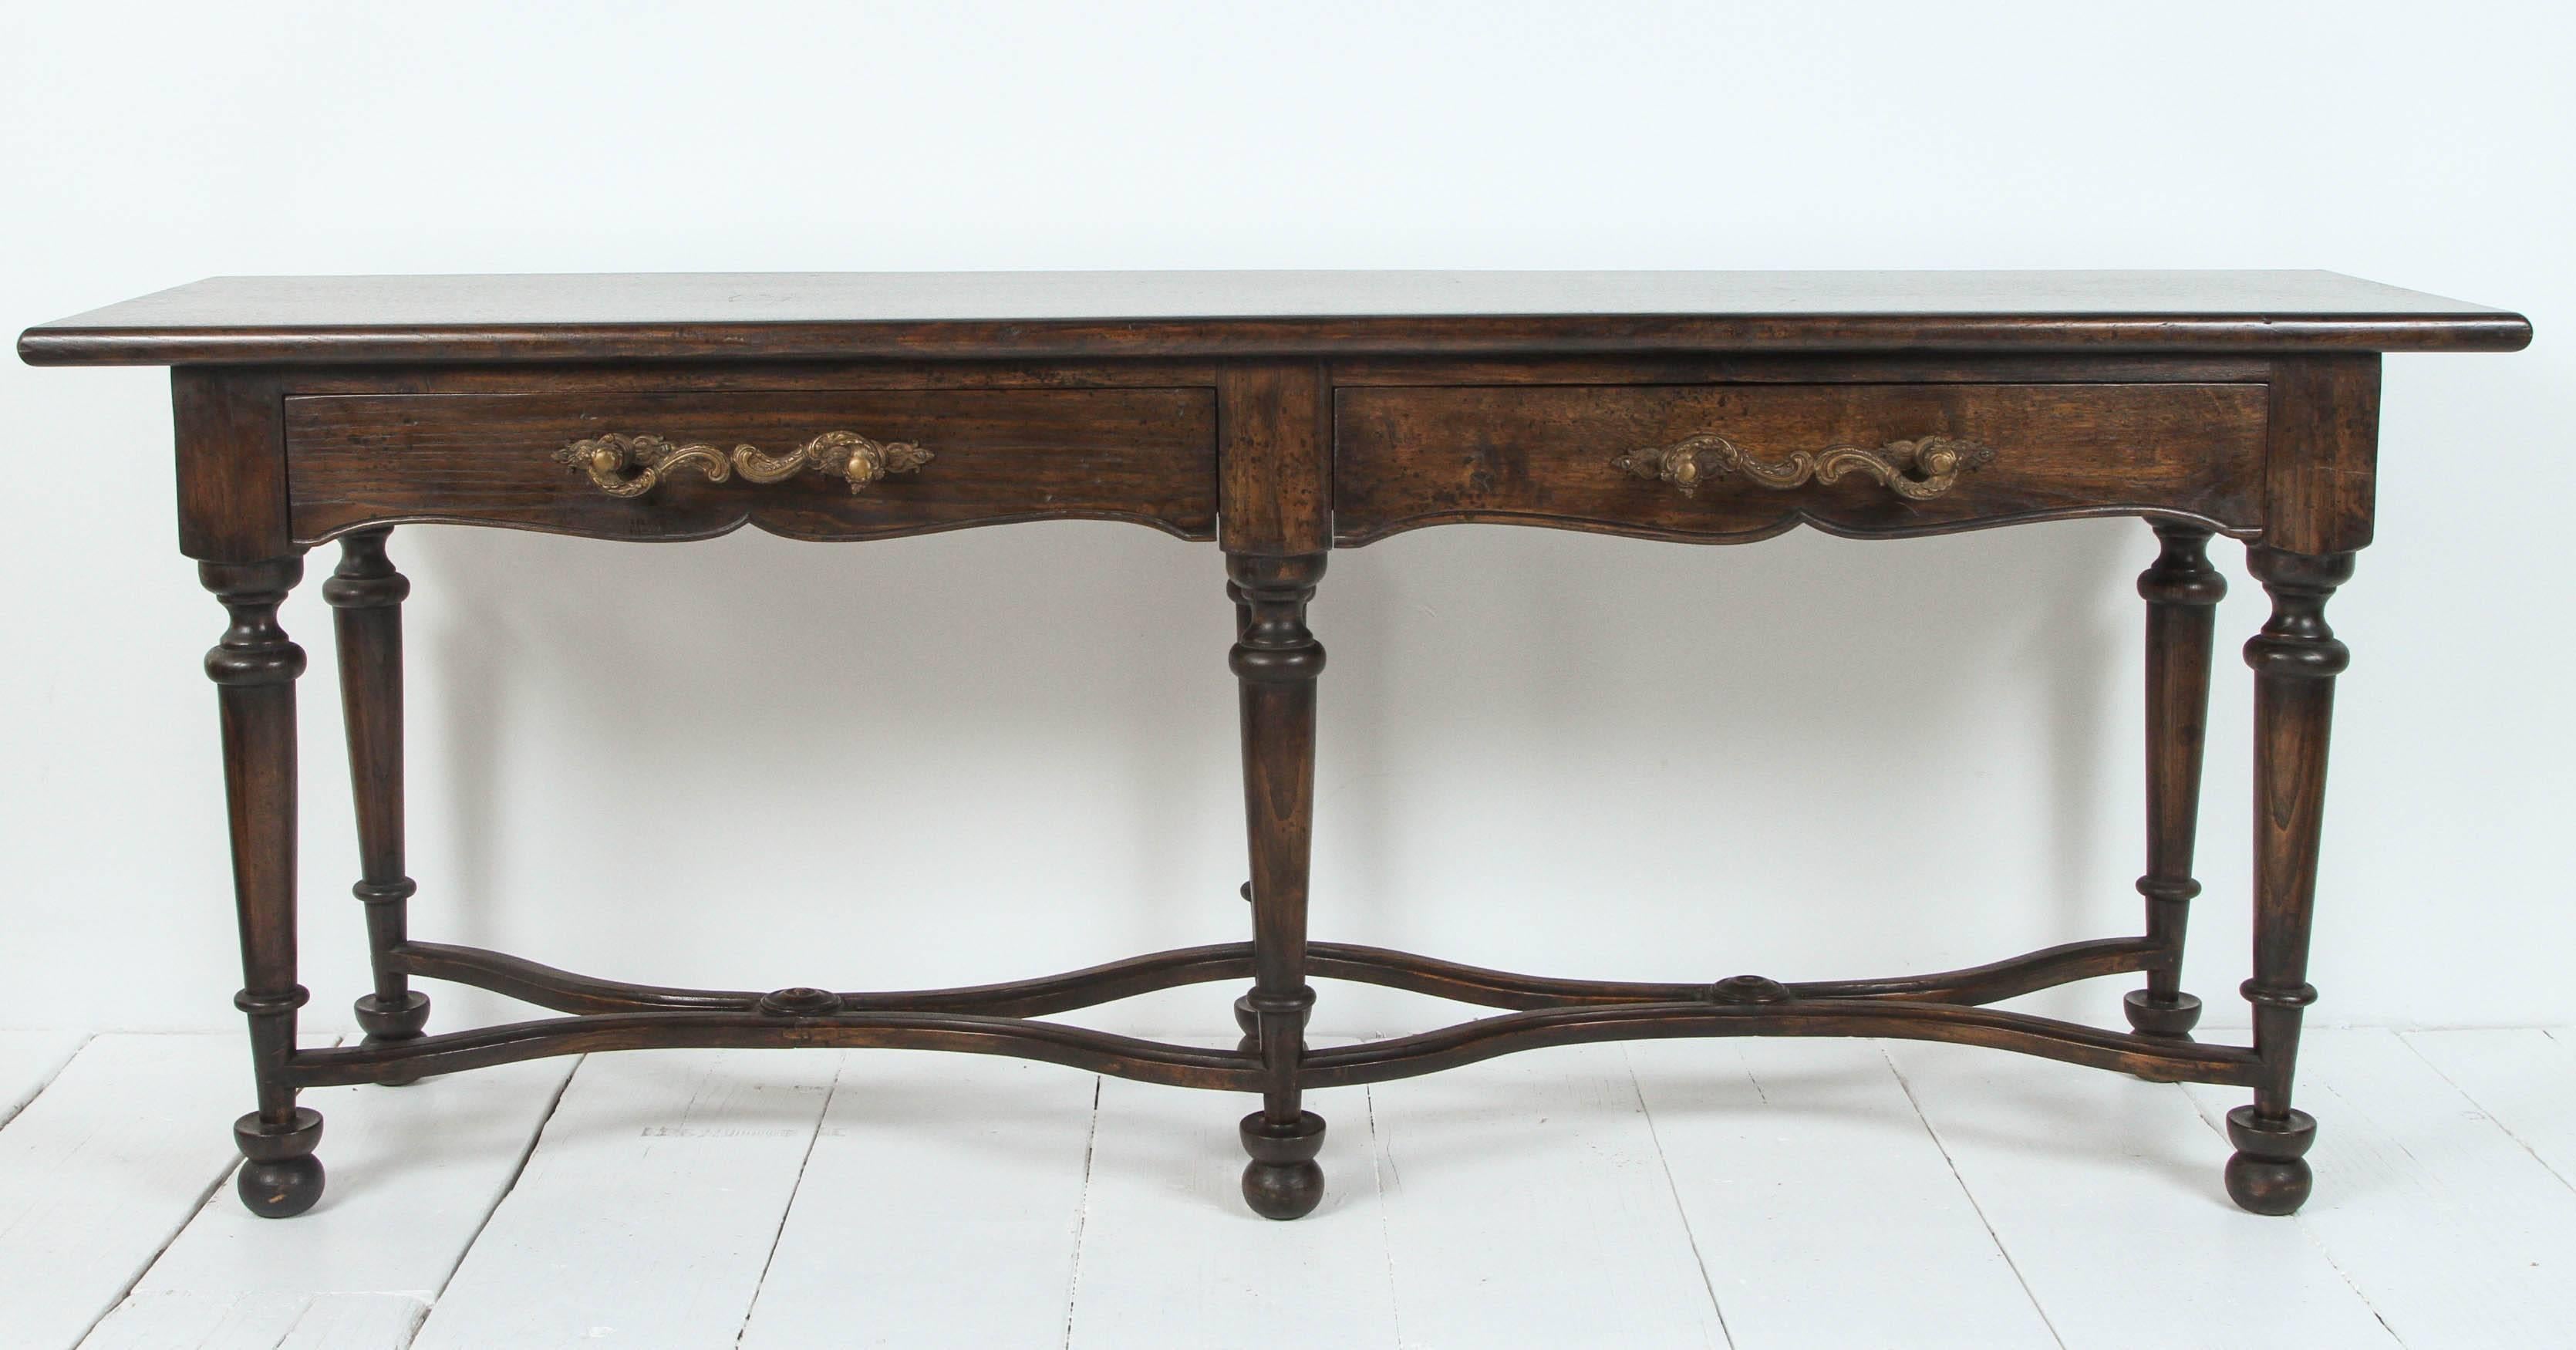 Vintage console with large wrought iron handles and six legs.